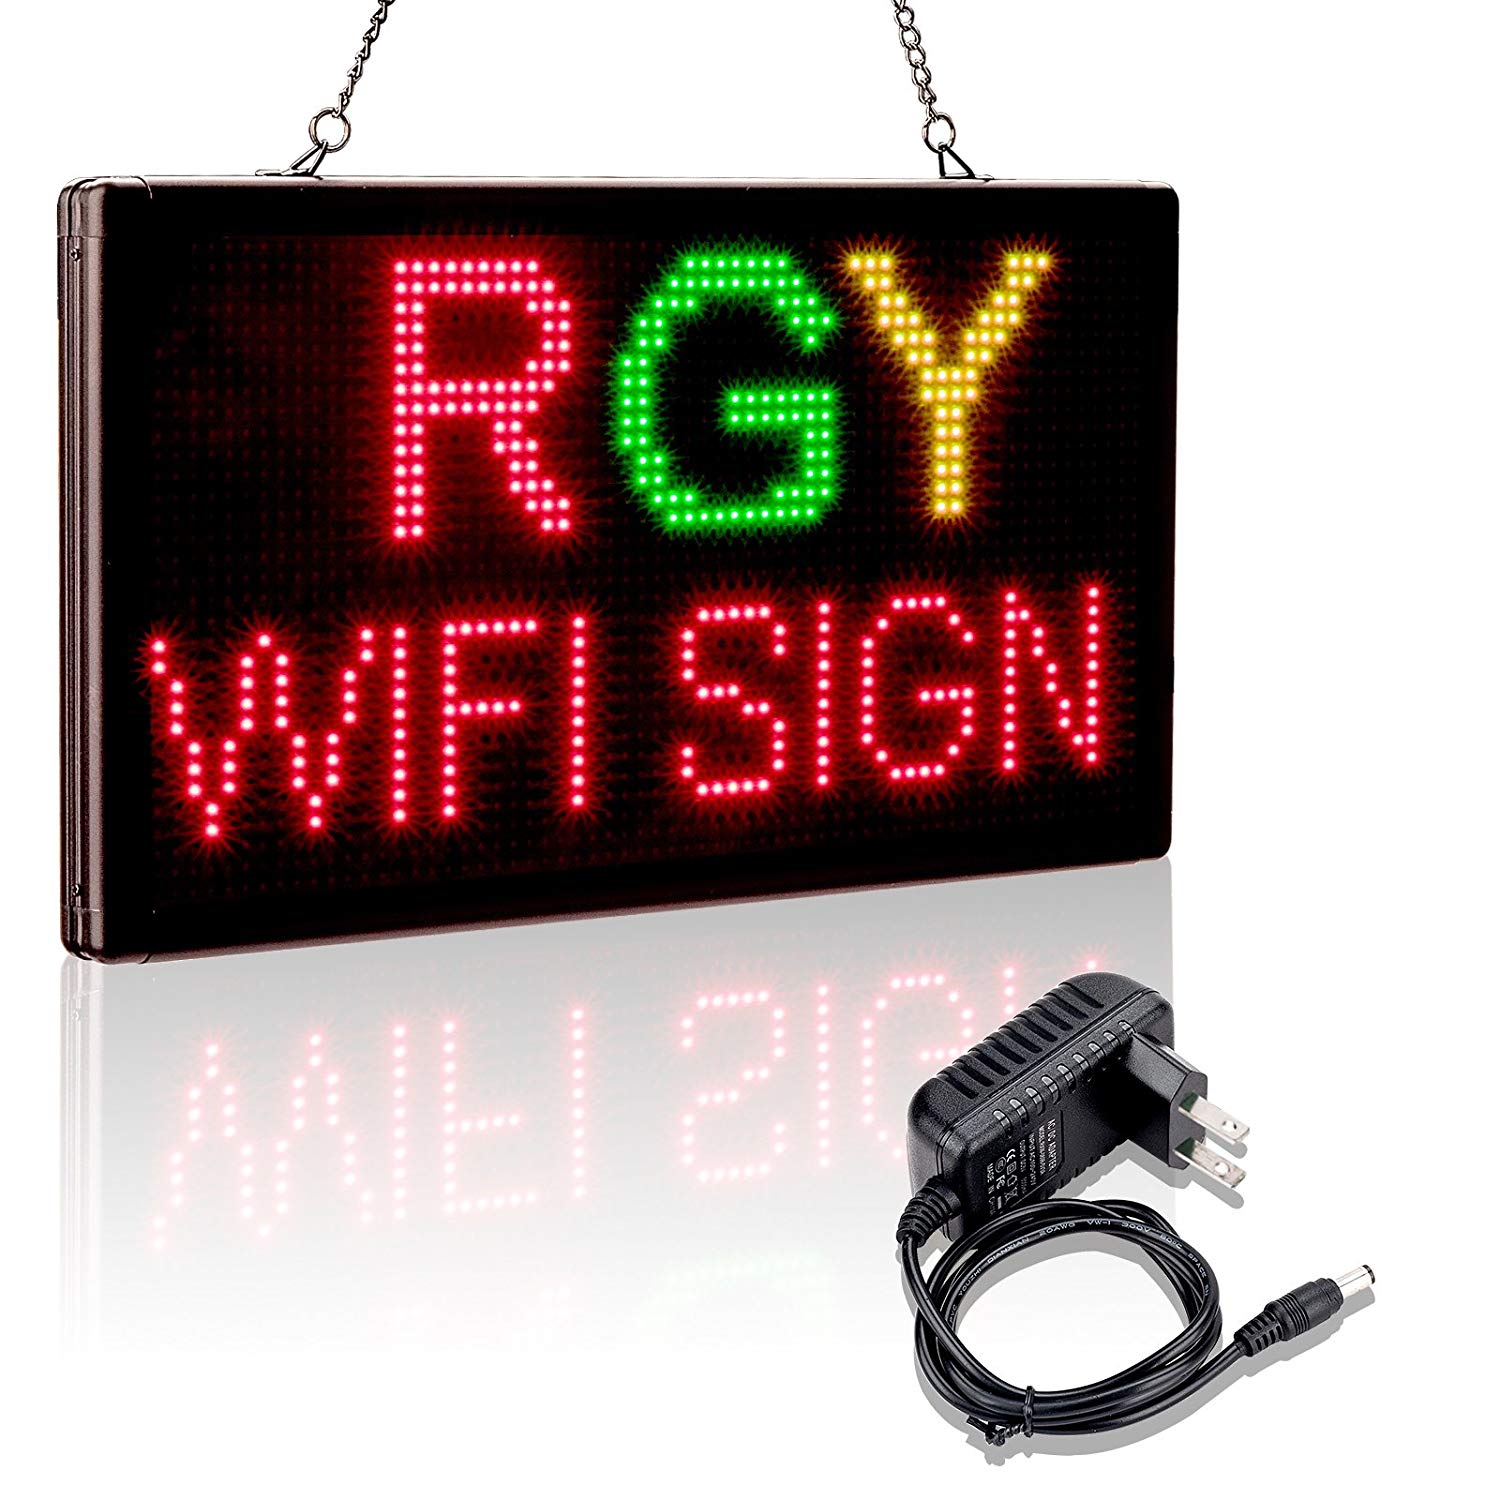 Leadleds 13"x7" Message Board WiFi LED Sign Programmable by Phone, 3 Colors - Leadleds